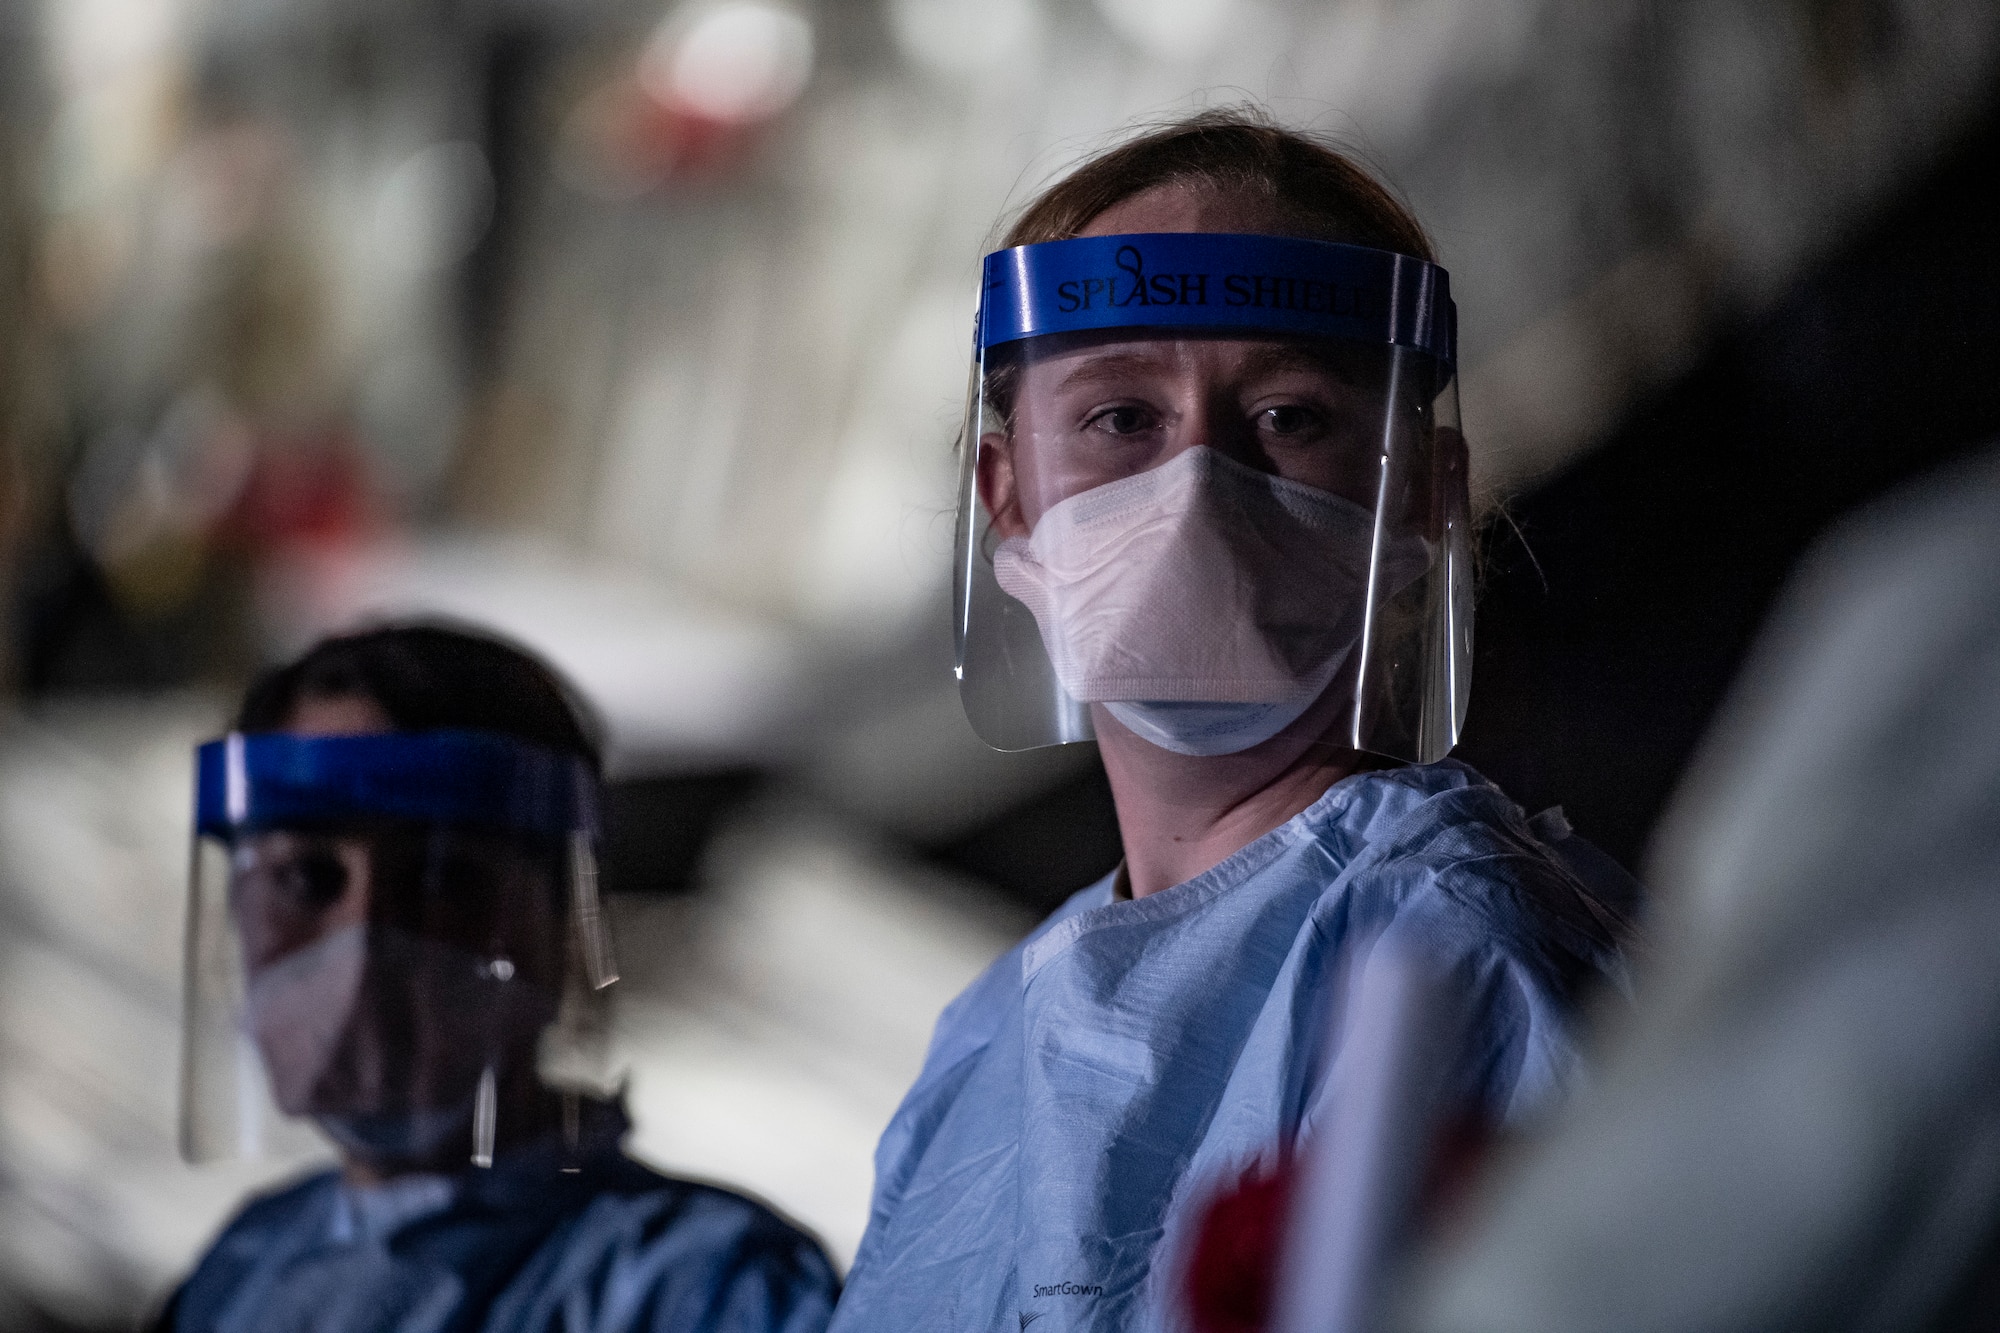 A U.S. Air Force medical Airman awaits patient documentation following the first operational use of the Transport Isolation System at Ramstein Air Base, Germany, April 10, 2020. The TIS is an infectious disease containment unit designed to minimize contamination risk to aircrew and medical attendants, while allowing in-flight medical care for patients afflicted by a disease. (U.S. Air Force photo by Staff Sgt. Devin Nothstine)